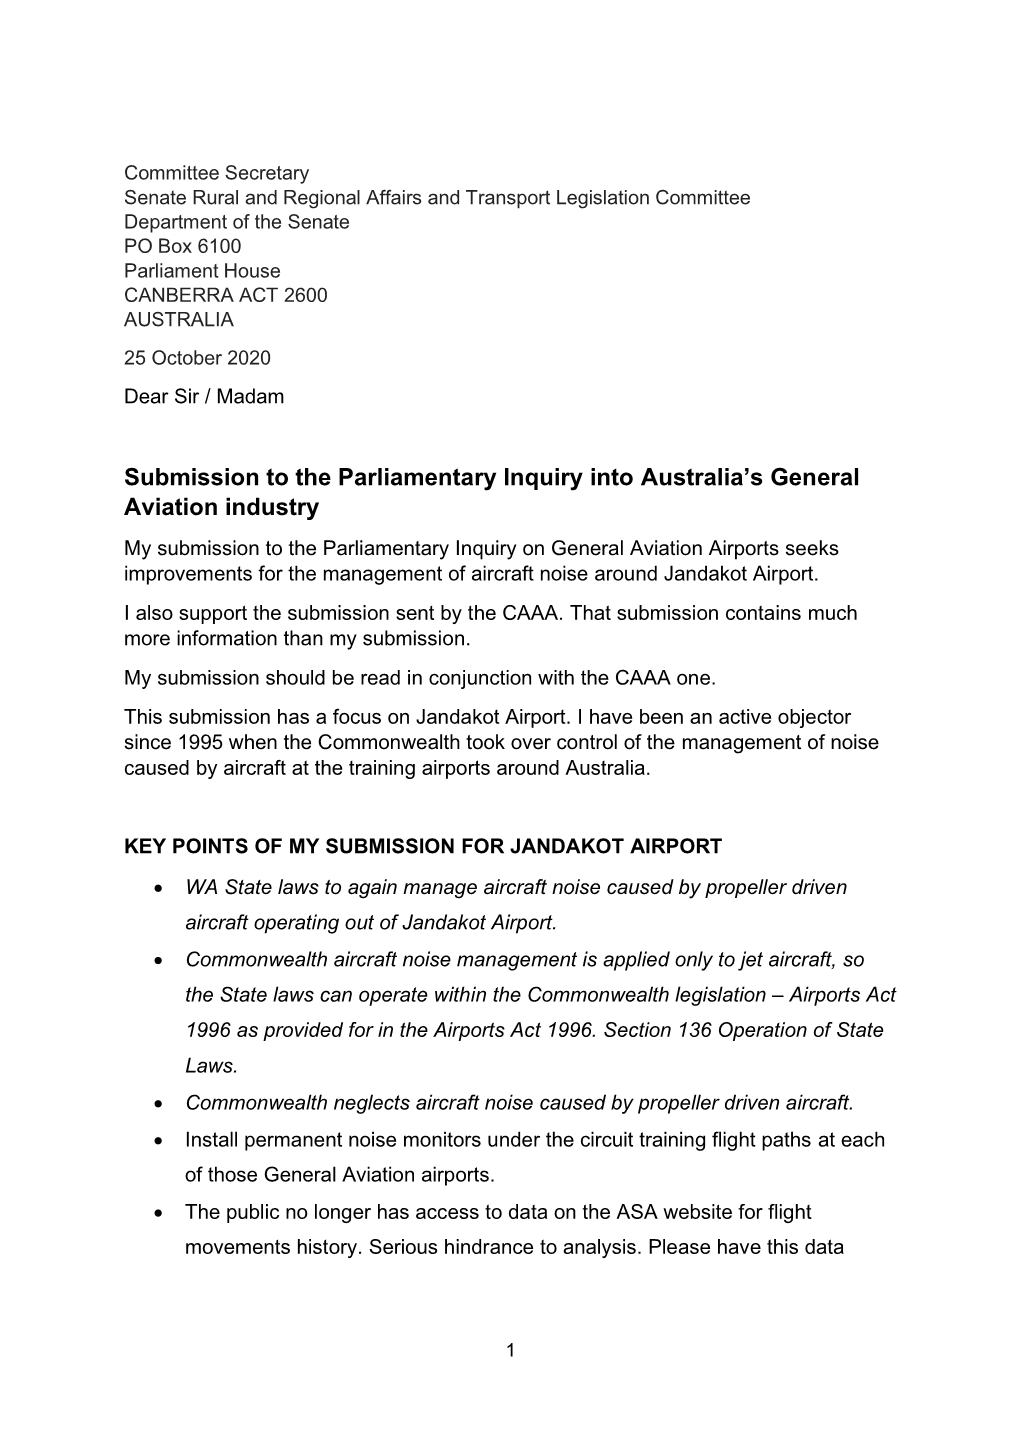 Submission to the Parliamentary Inquiry Into Australia's General